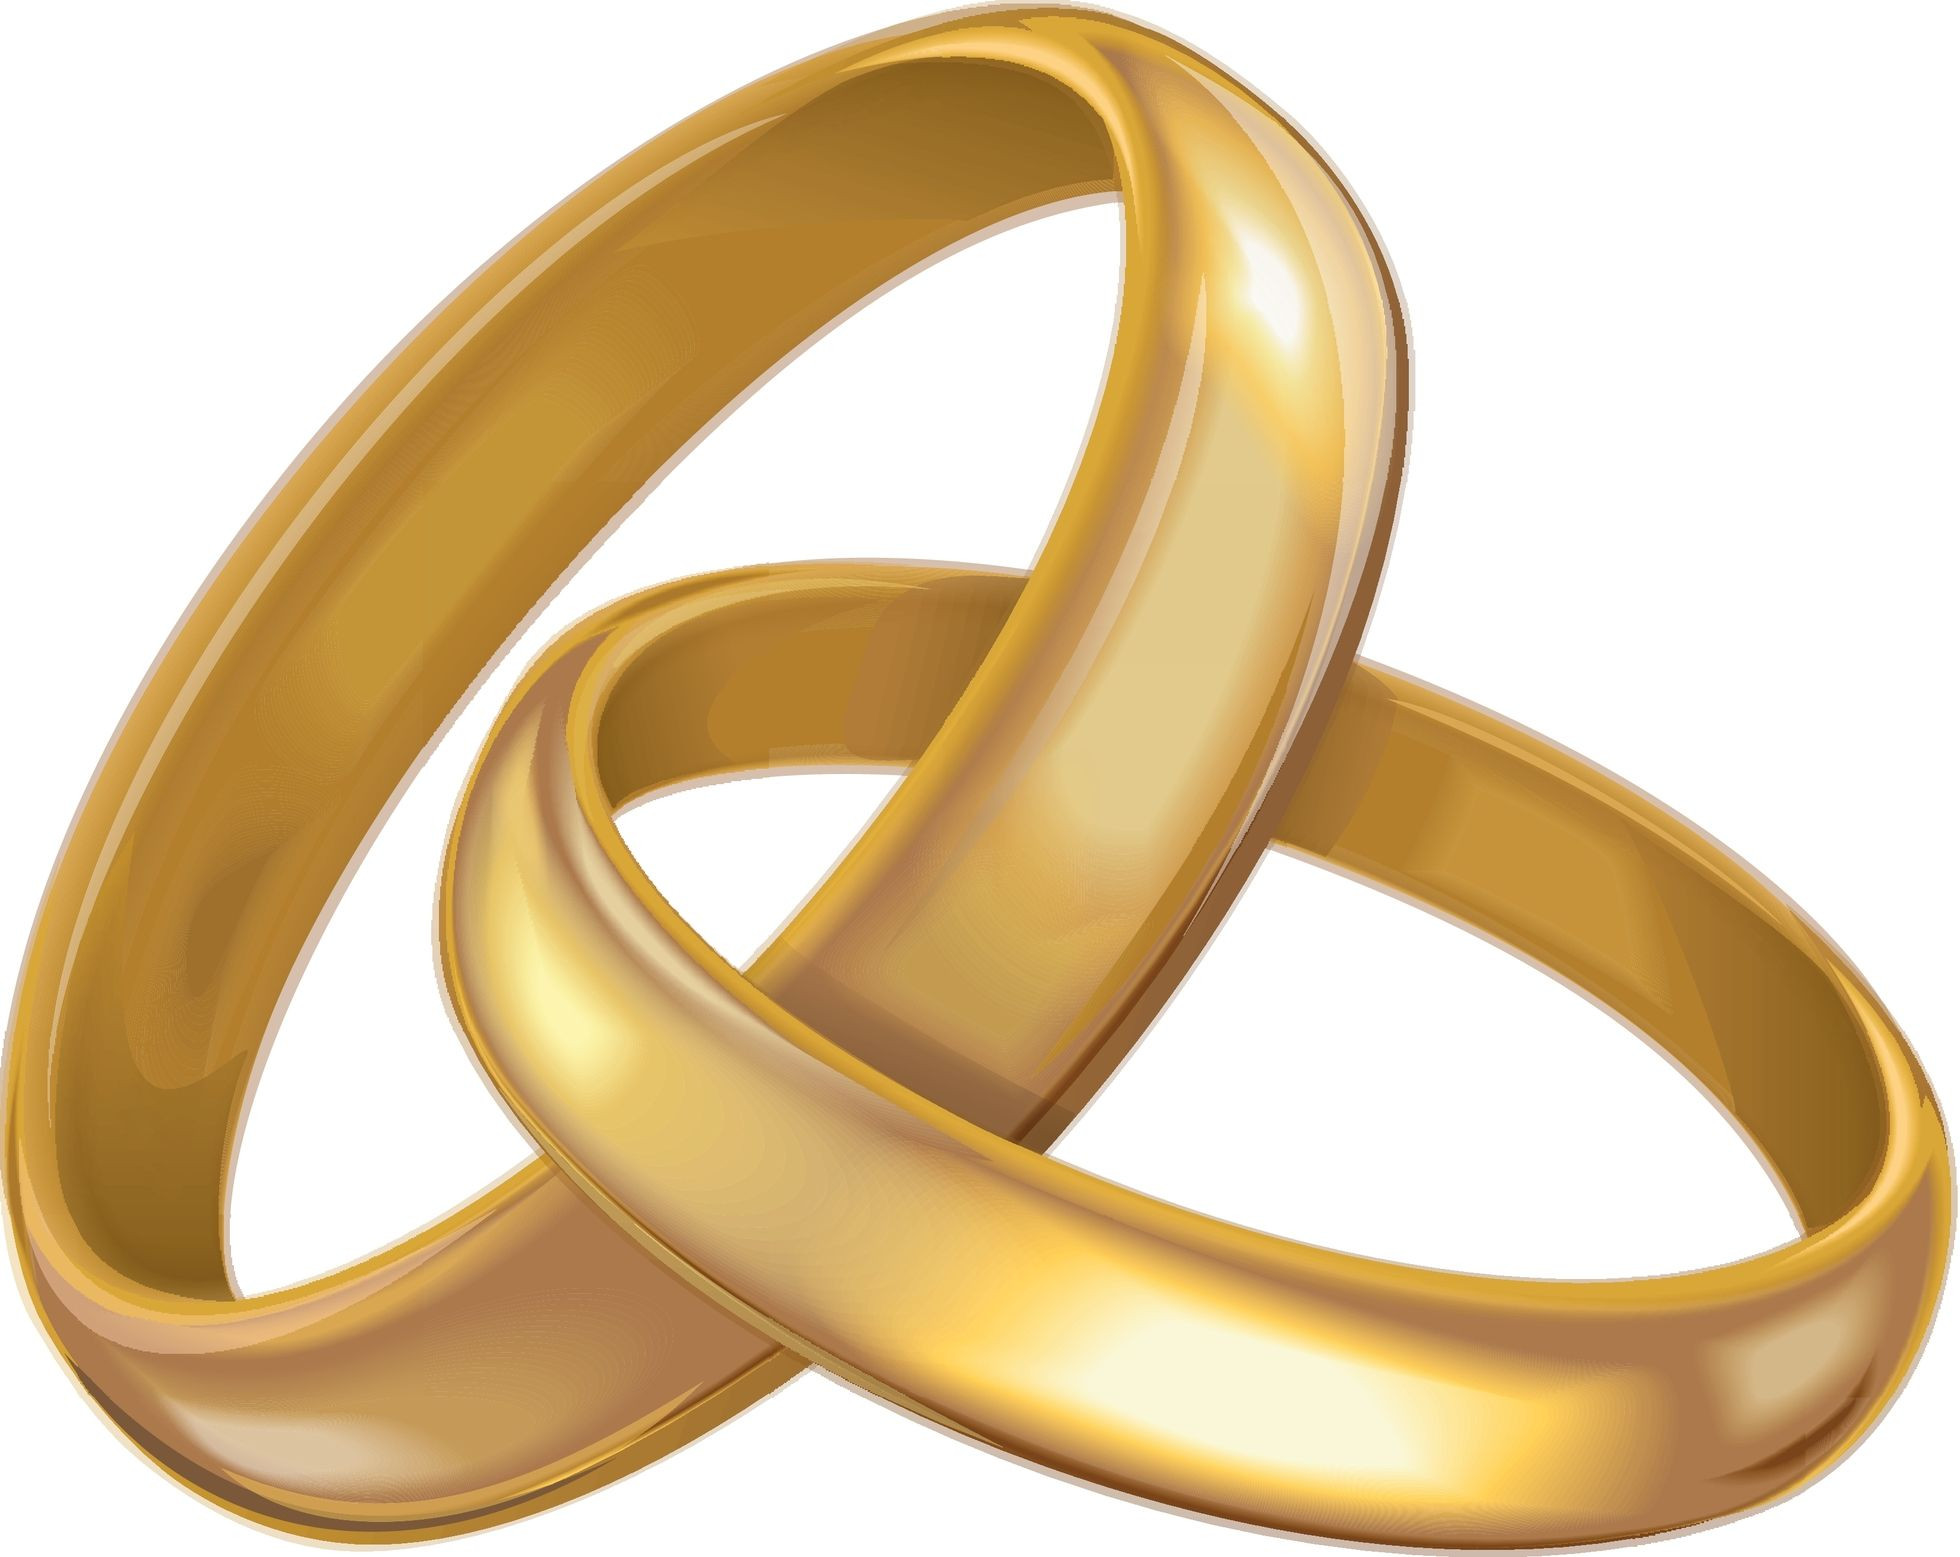 Clipart Wedding Rings
 Wedding Rings Clipart The Cliparts